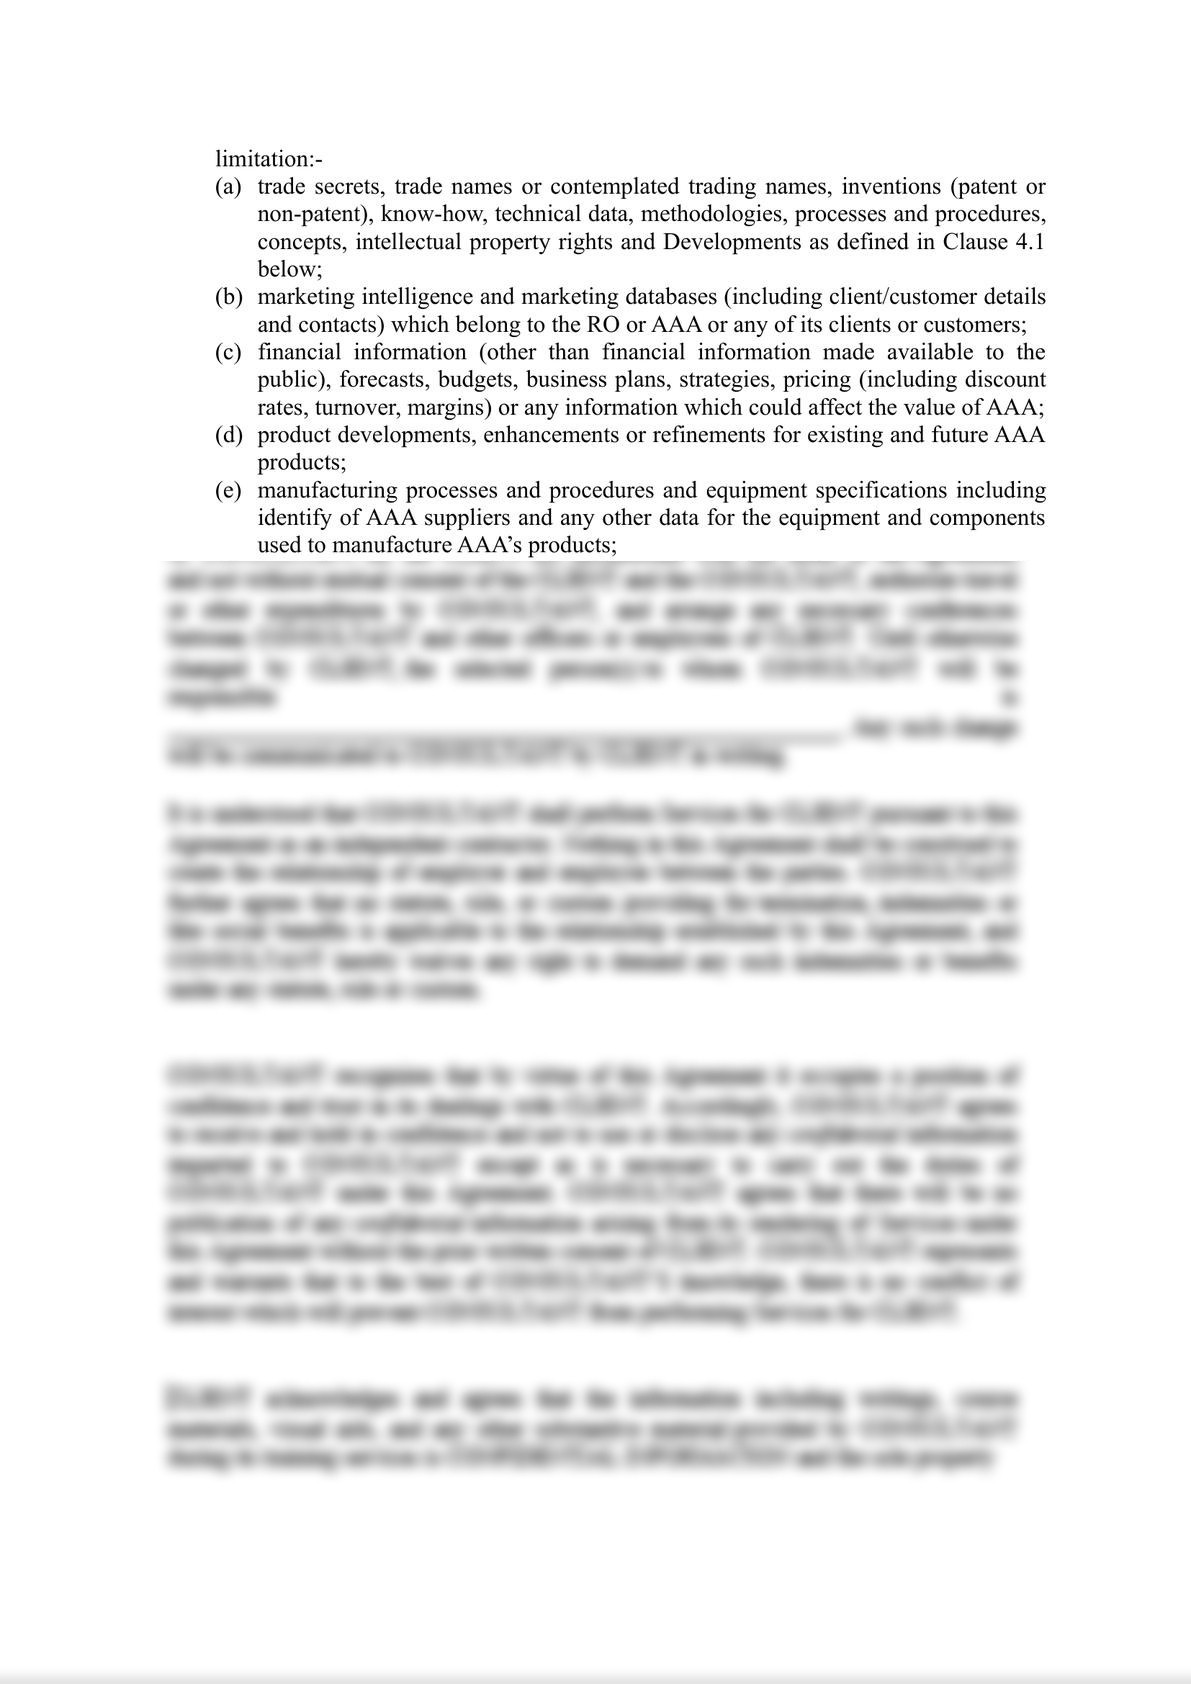 Confidentiality and Non-Competition Agreement-2